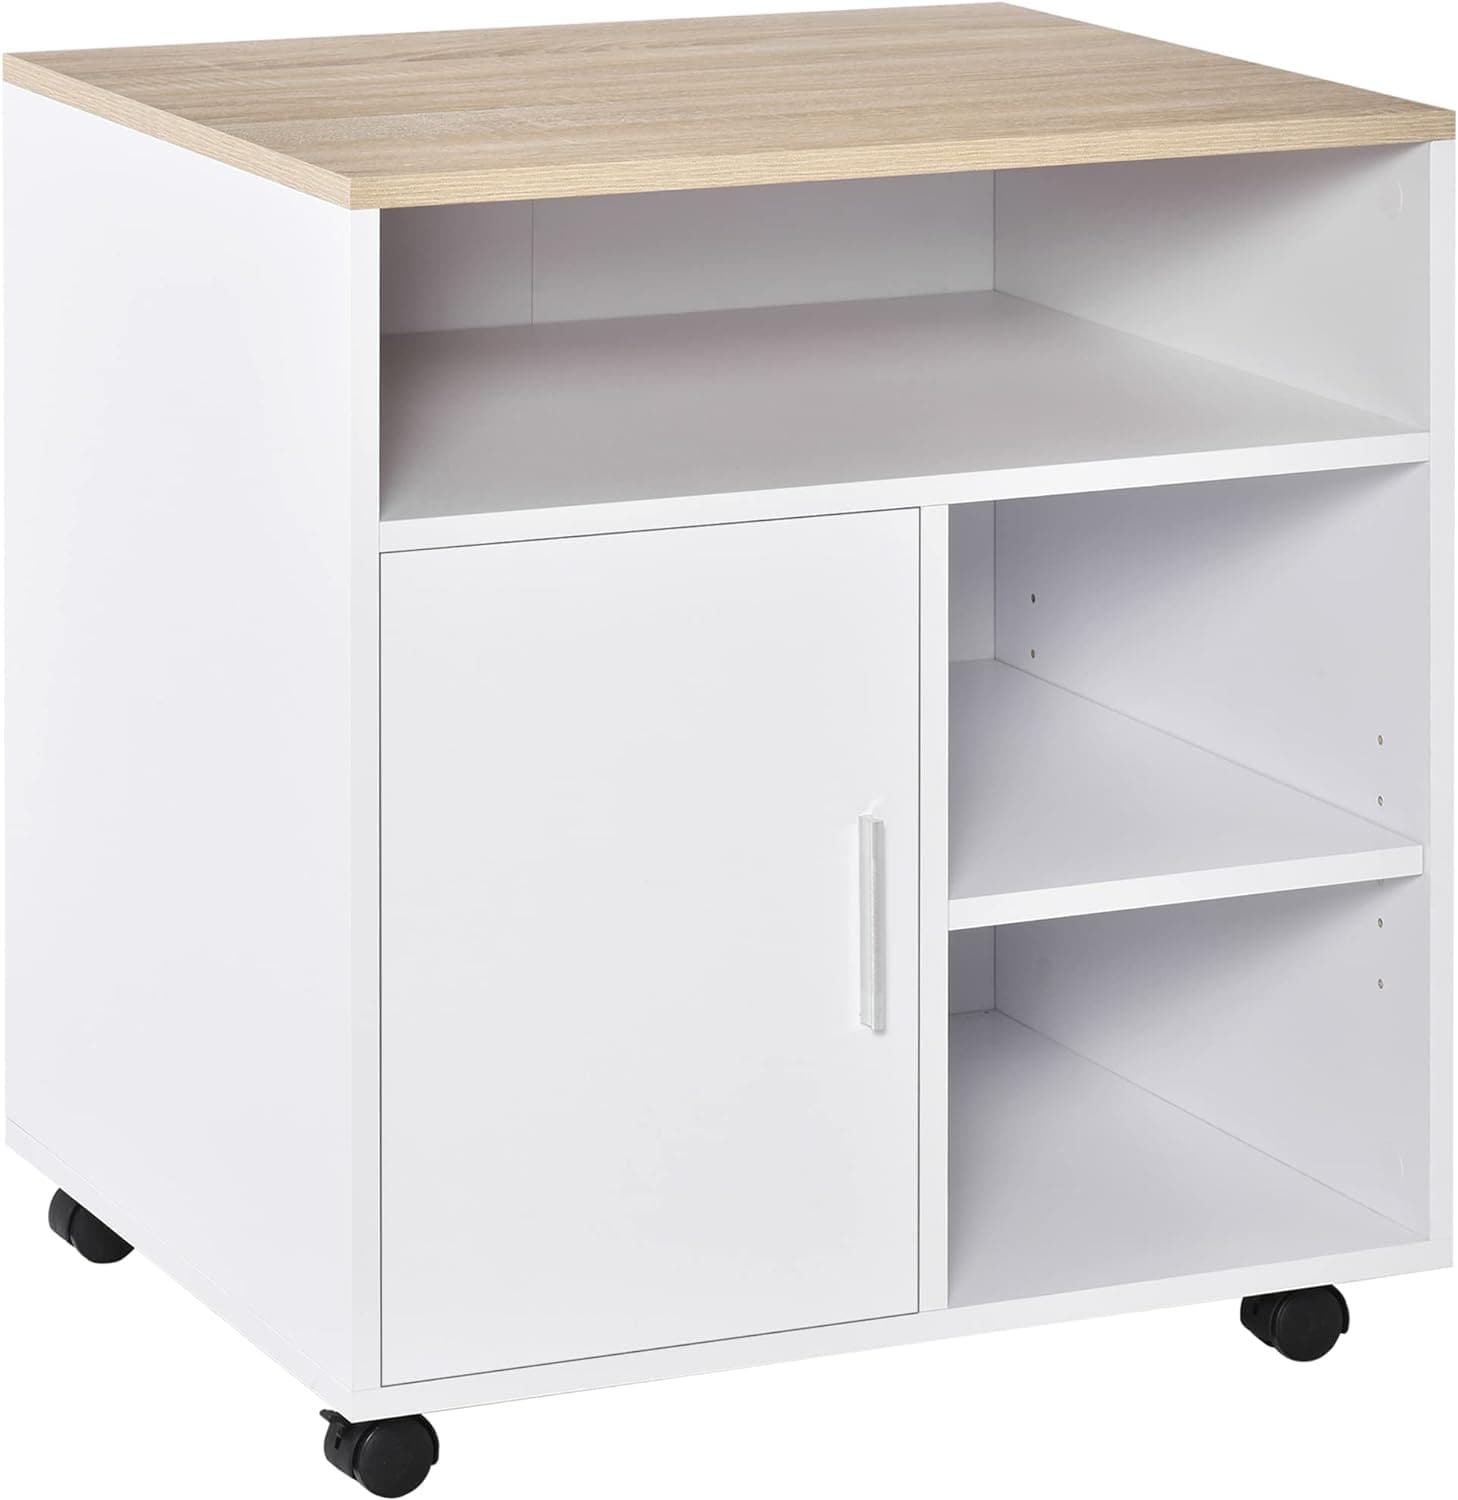 ProperAV Extra Particle Board 4-Compartment Storage Unit with Wheels (White & Oak)